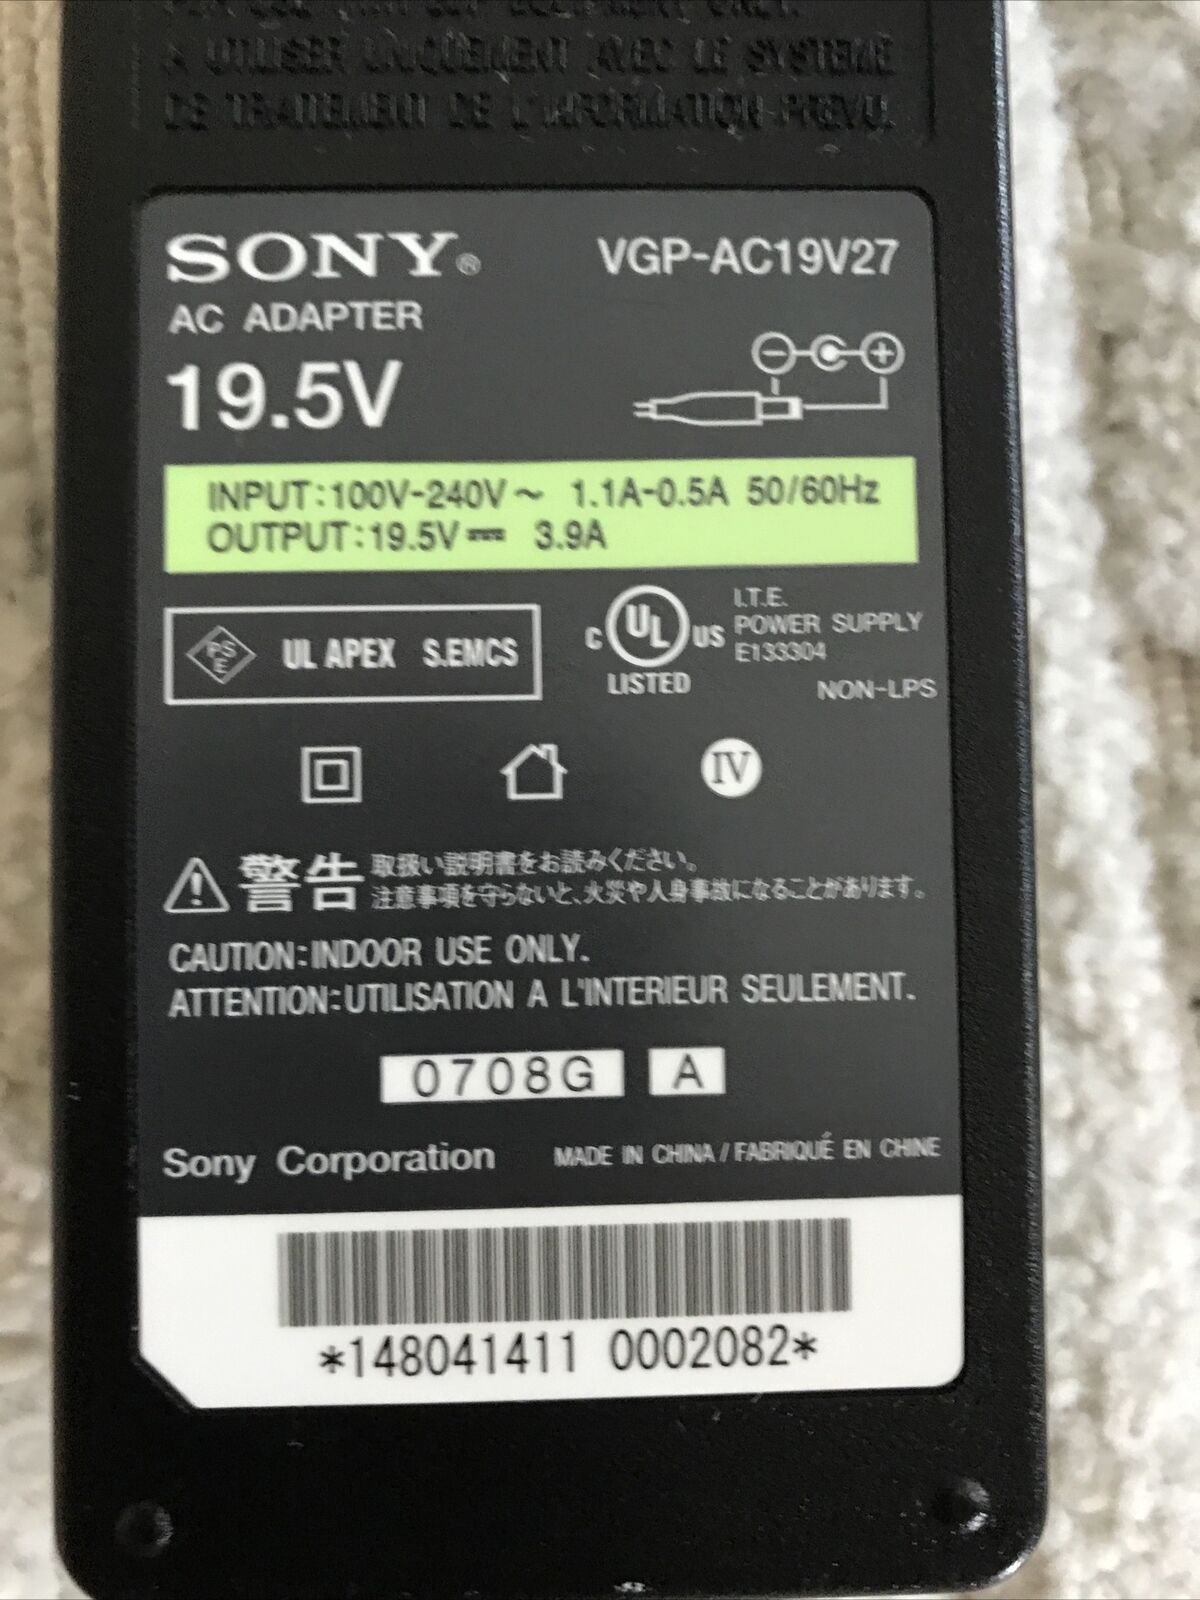 Sony Genuine Laptop Charger AC Adapter Power Supply VGP-AC19V27 19.5V 3.9A 76W Brand: Sony Color: